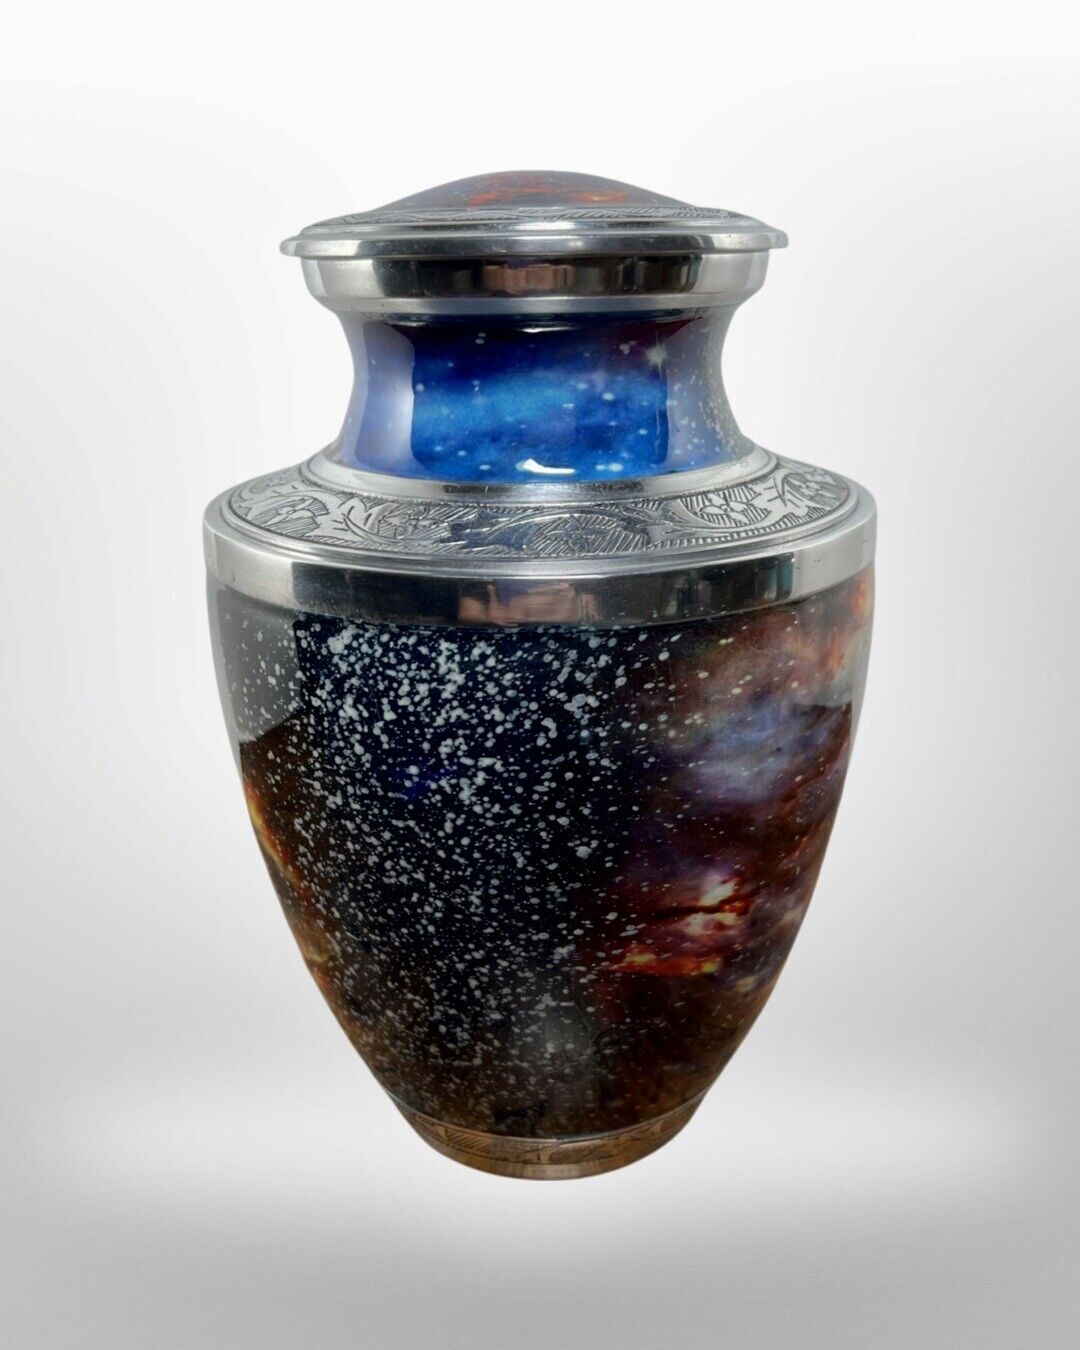 Milky Way Galaxy Cremation Urn, Cremation Urns Adult, Urns for Human Ashes